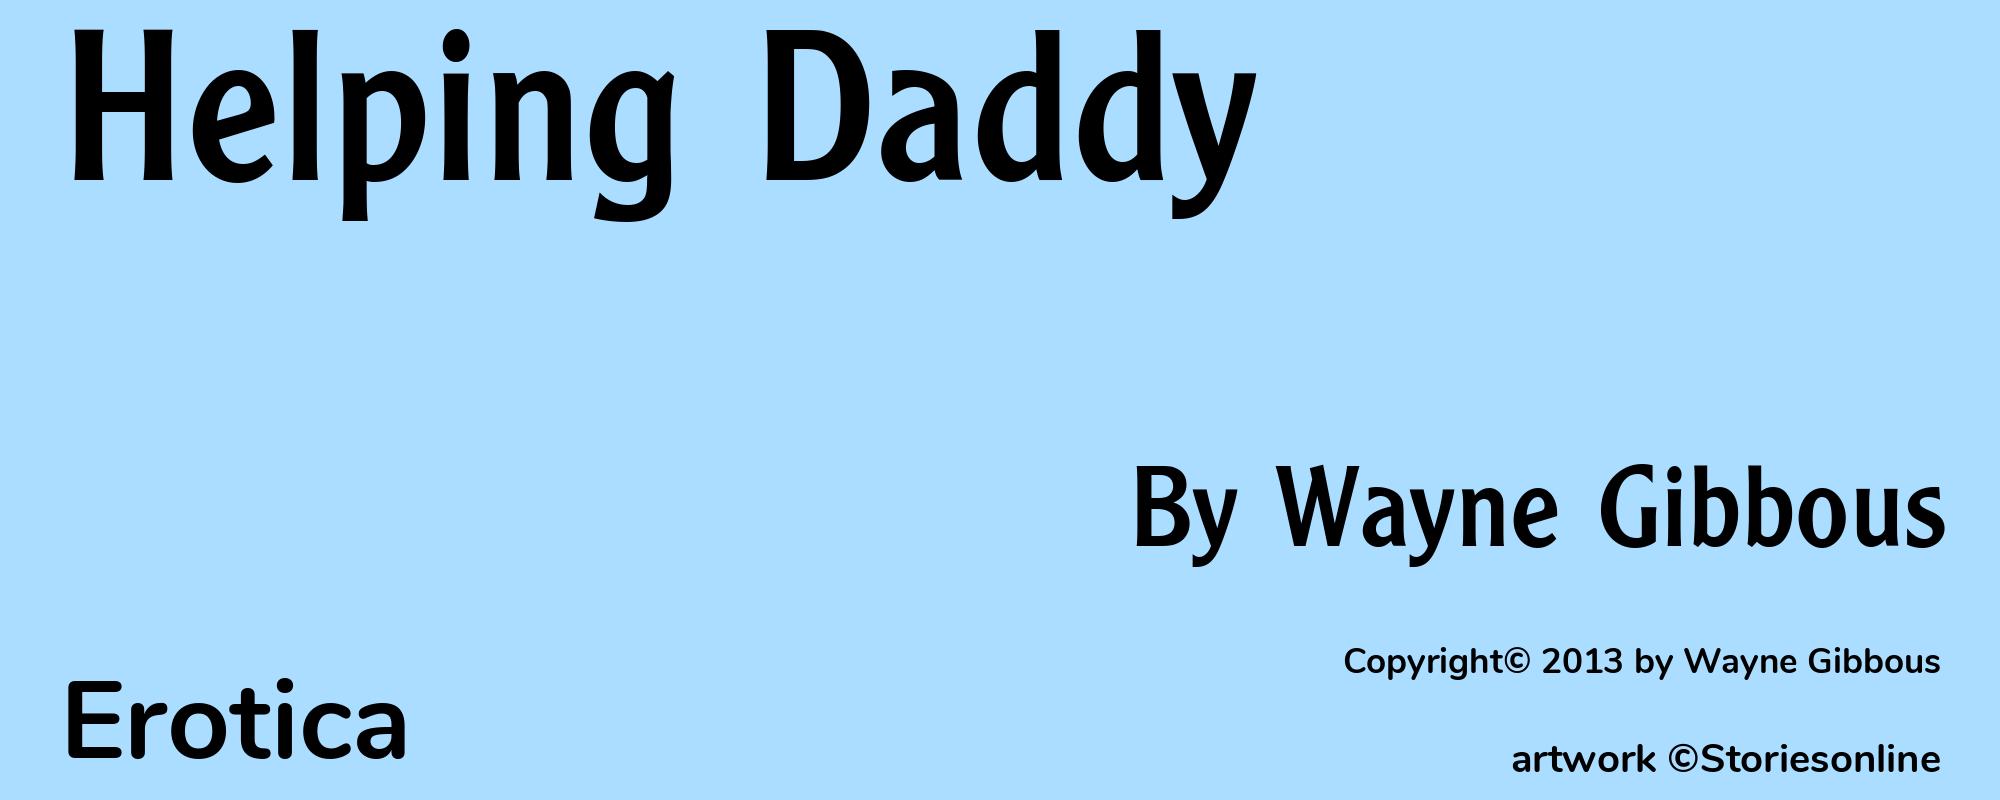 Helping Daddy - Cover